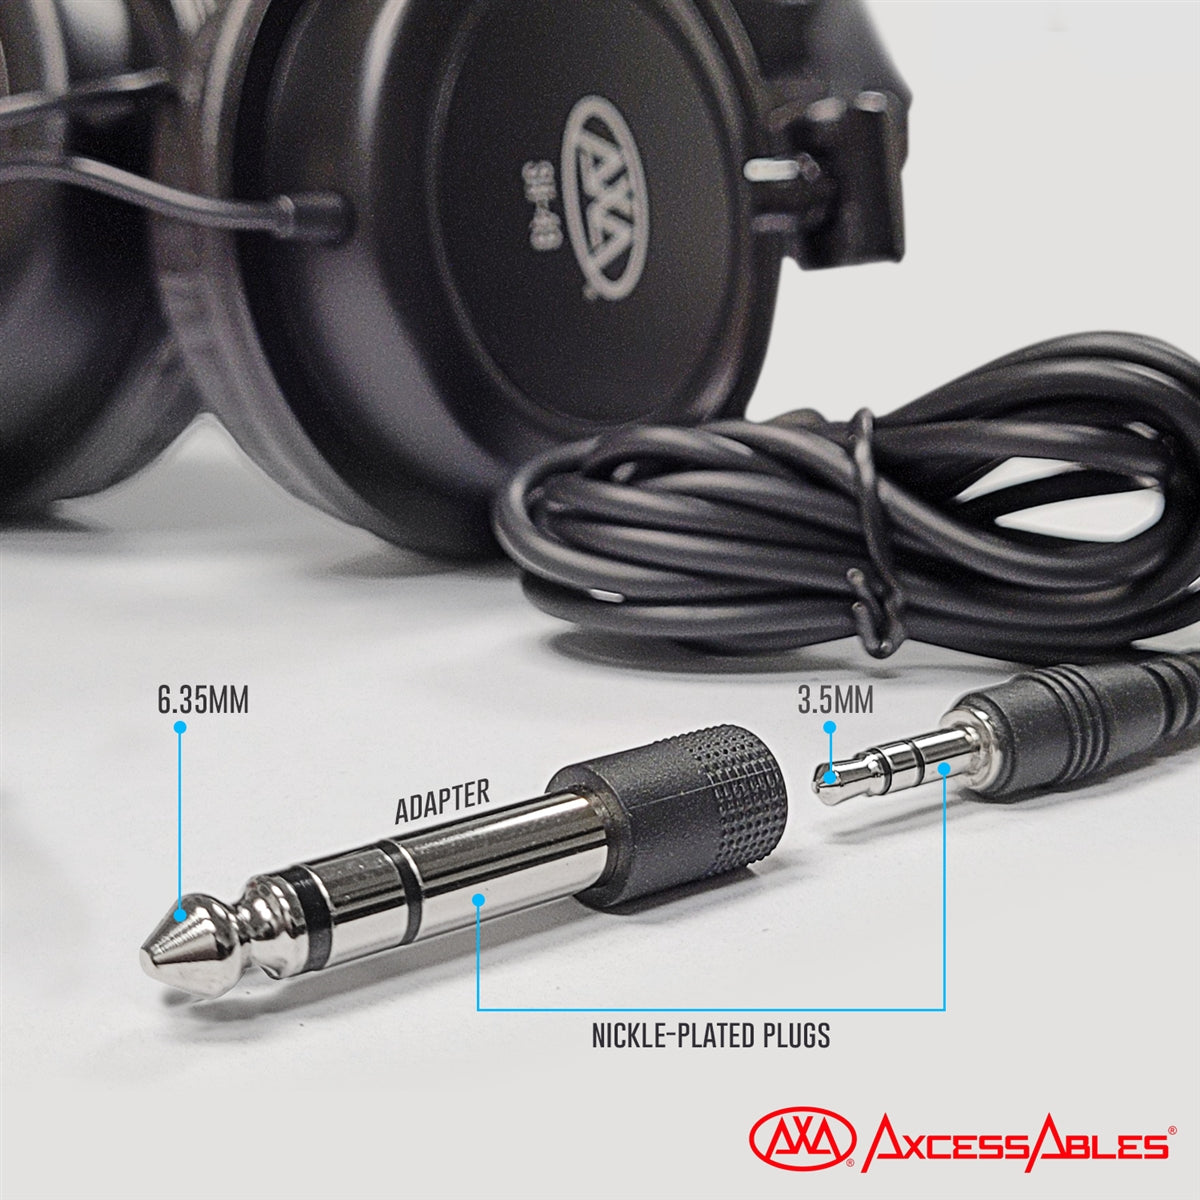 AxcessAbles On-Ear Closed-Back Studio/DJ Headphones with 6ft Cable and 1/4-inch Jack Adapter | 38mm Neodymium Driver Swiveling Cups| Guitar | Recording (SH-49)